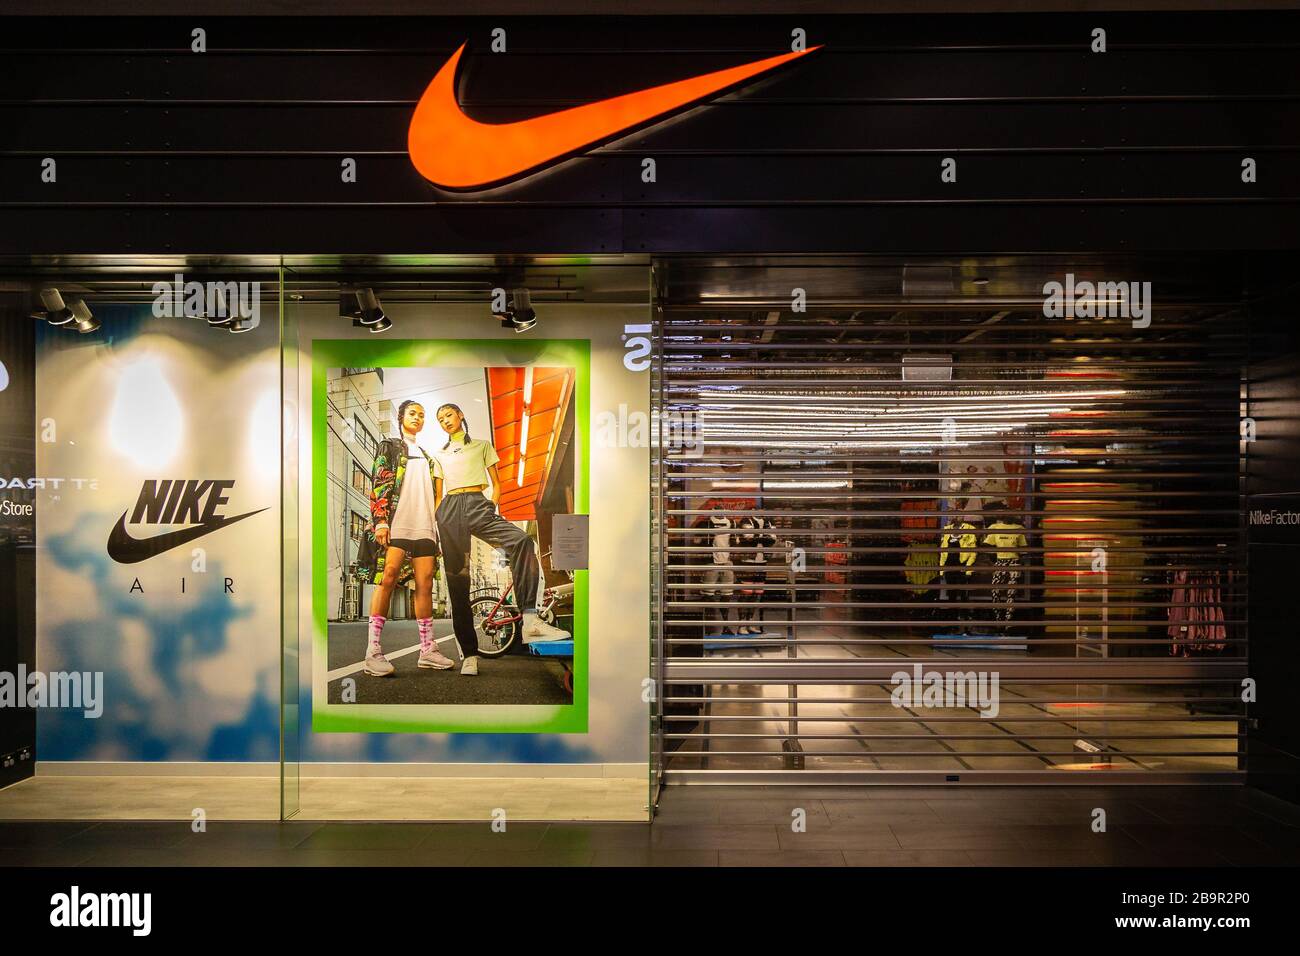 Melbourne, Australia, 25 March, 2020. Nike stores choose to close their  doors as COVID-19 Pandemic hits Melbourne, Australia. Credit: Dave  Hewison/Alamy Live News Stock Photo - Alamy